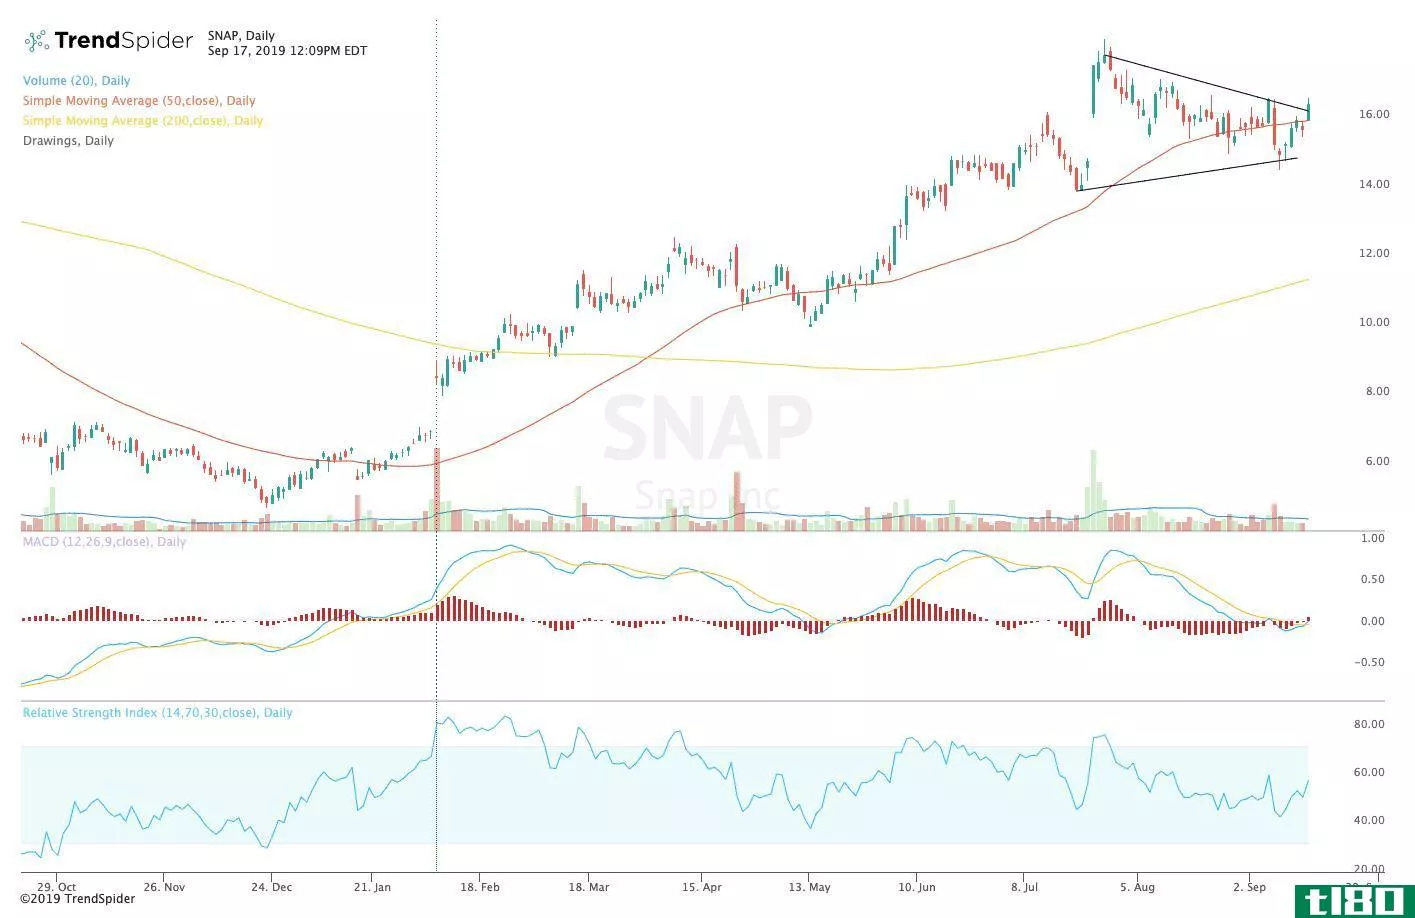 Chart showing the share price performance of Snap Inc. (SNAP)